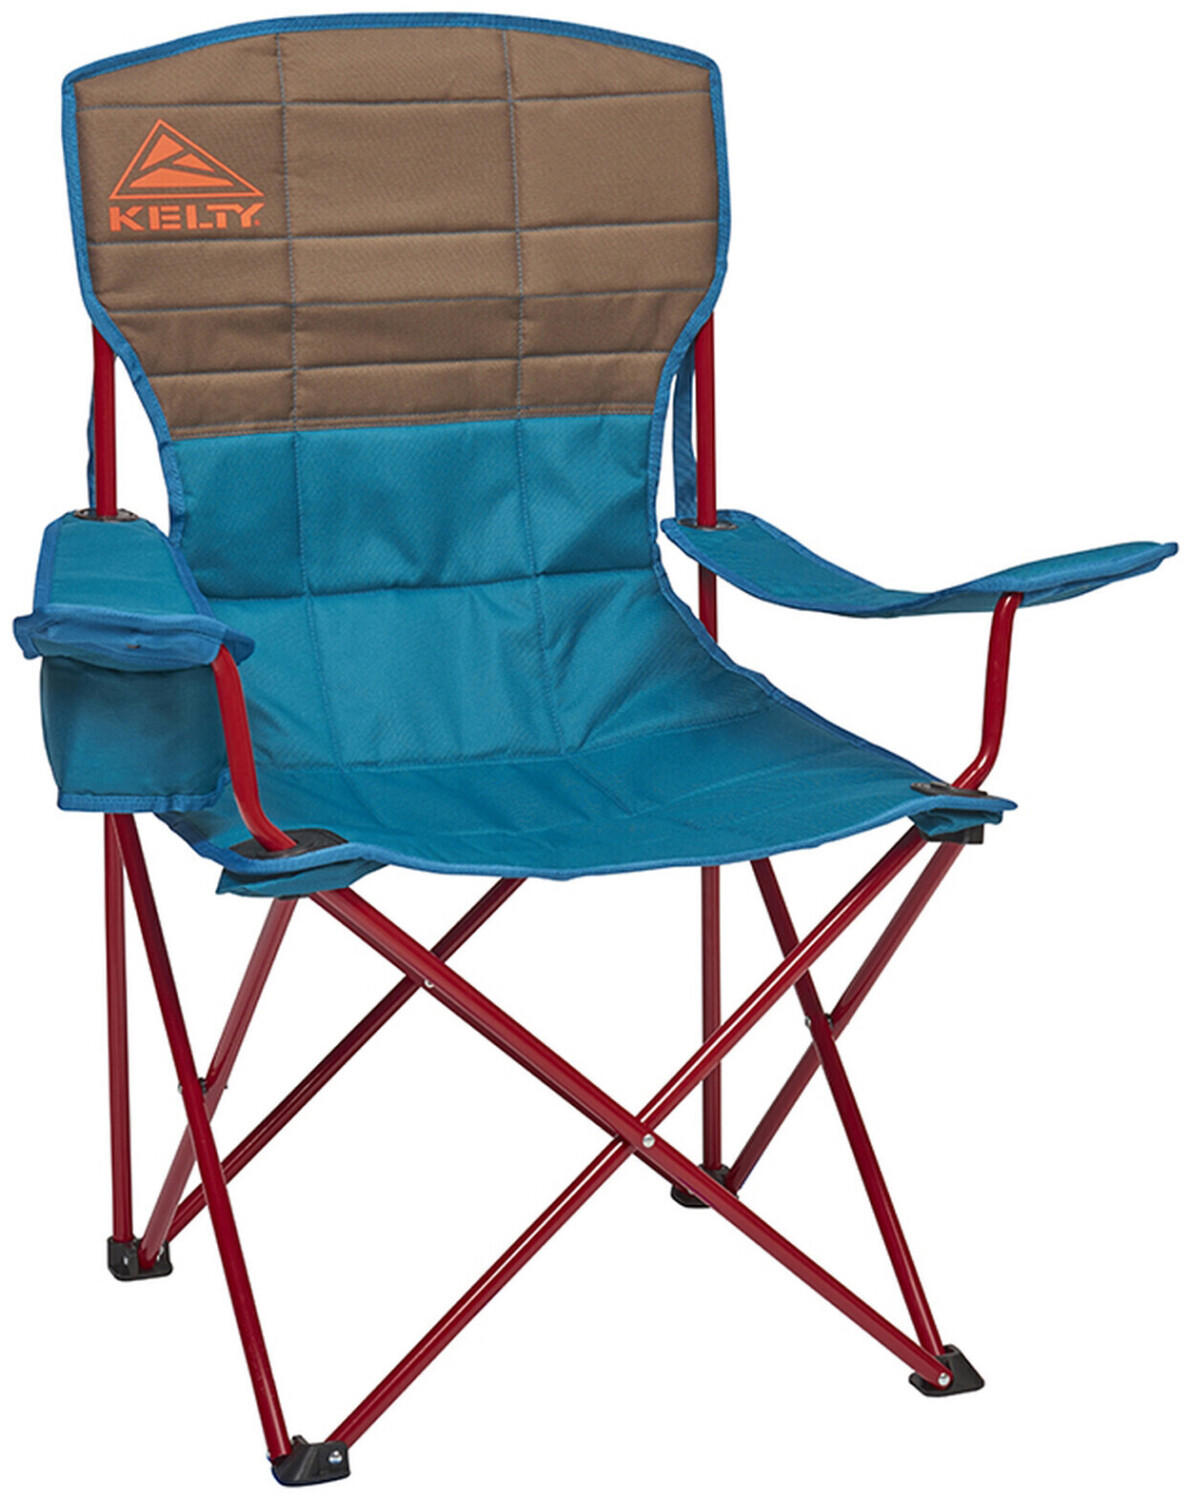 Kelty Deluxe Camping Lounge Chair